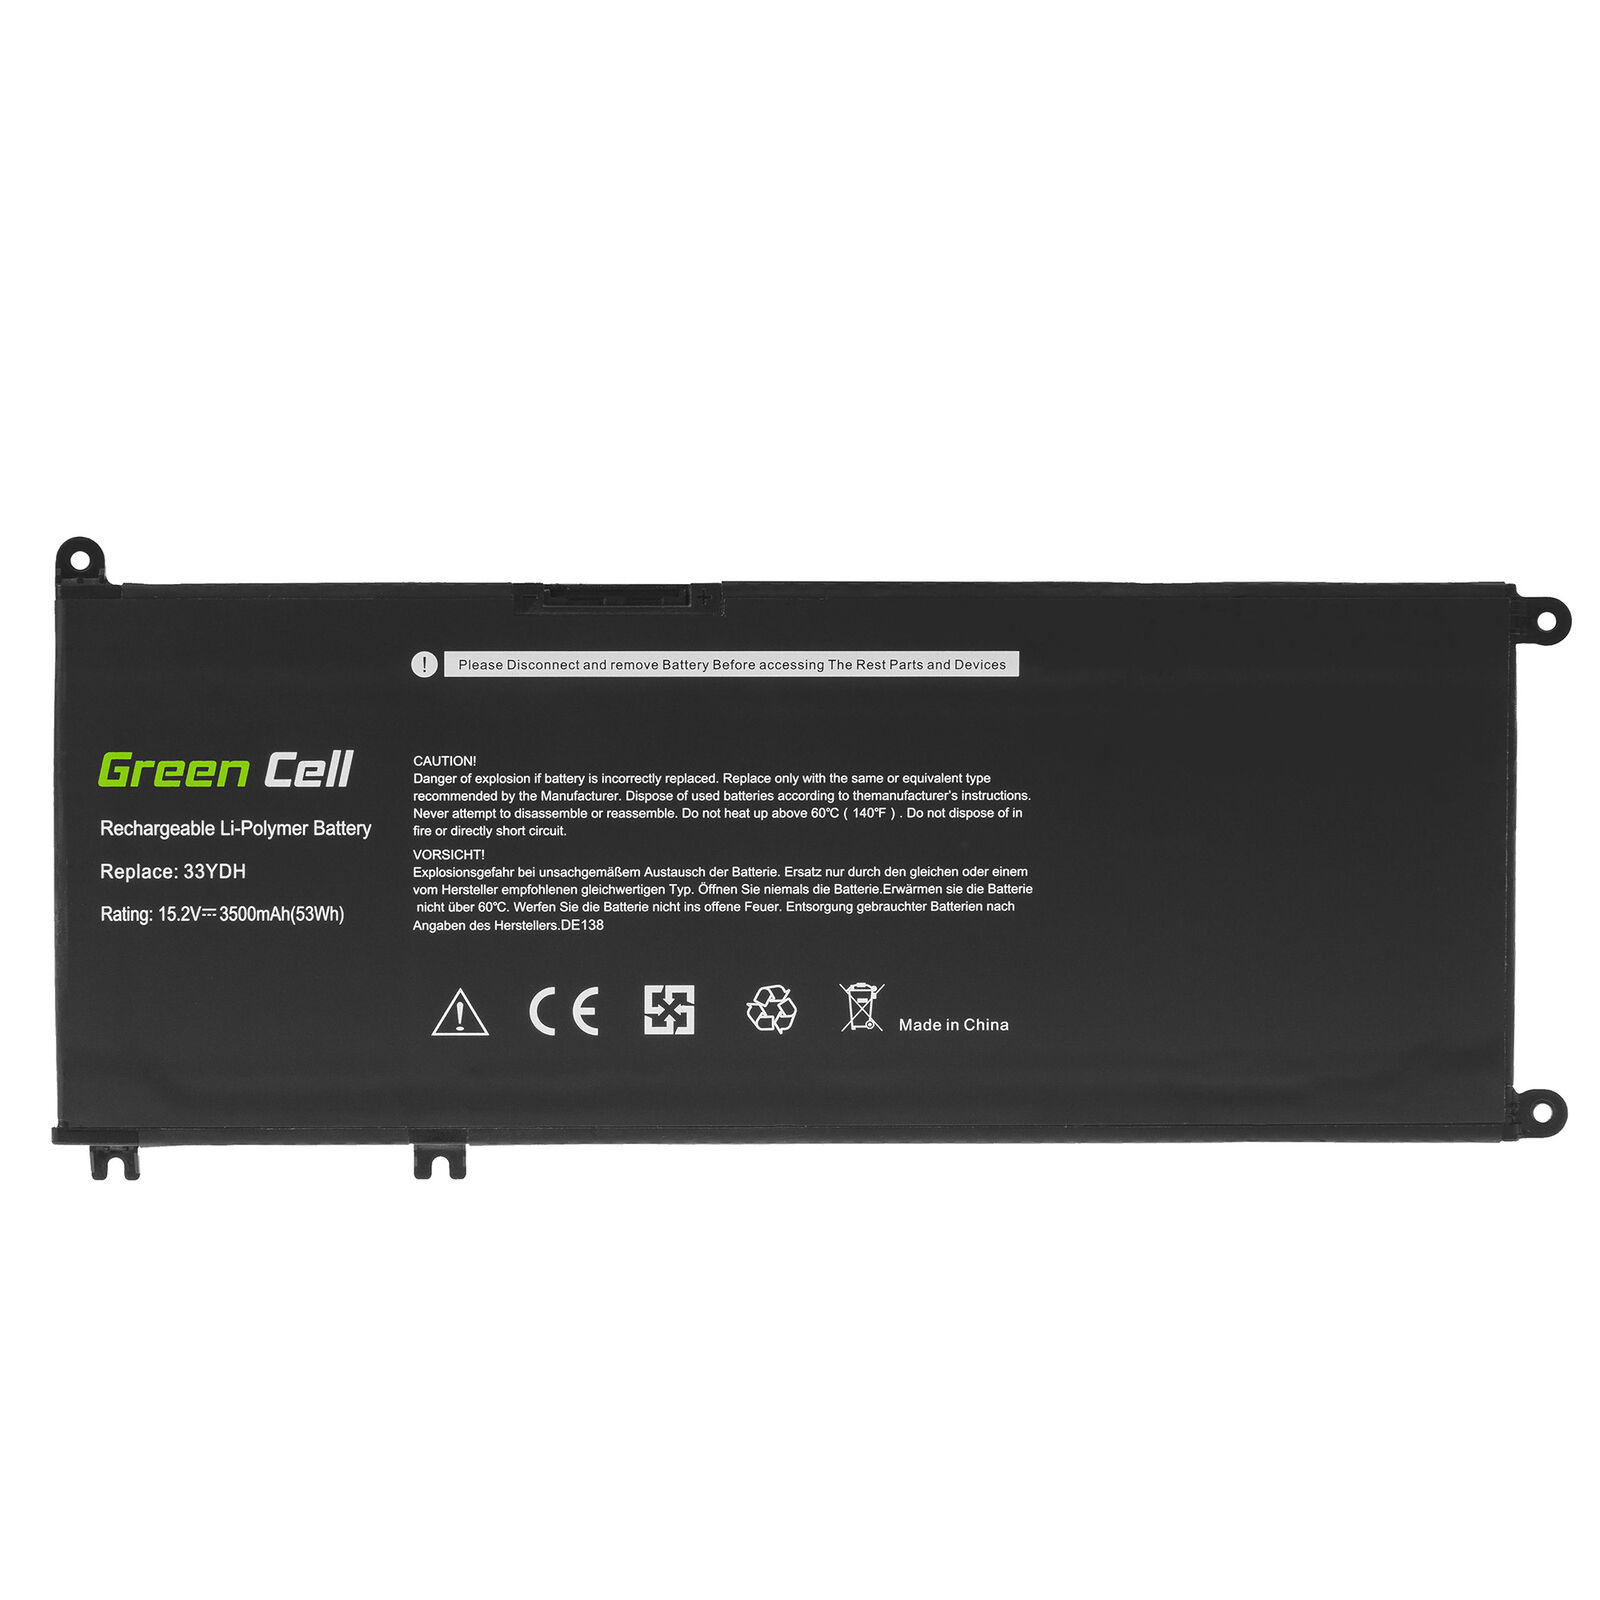 Dell G3 3579,G3 3779,G5 5587,G7 7588 99NF2 33YDH W7NKD compatible battery